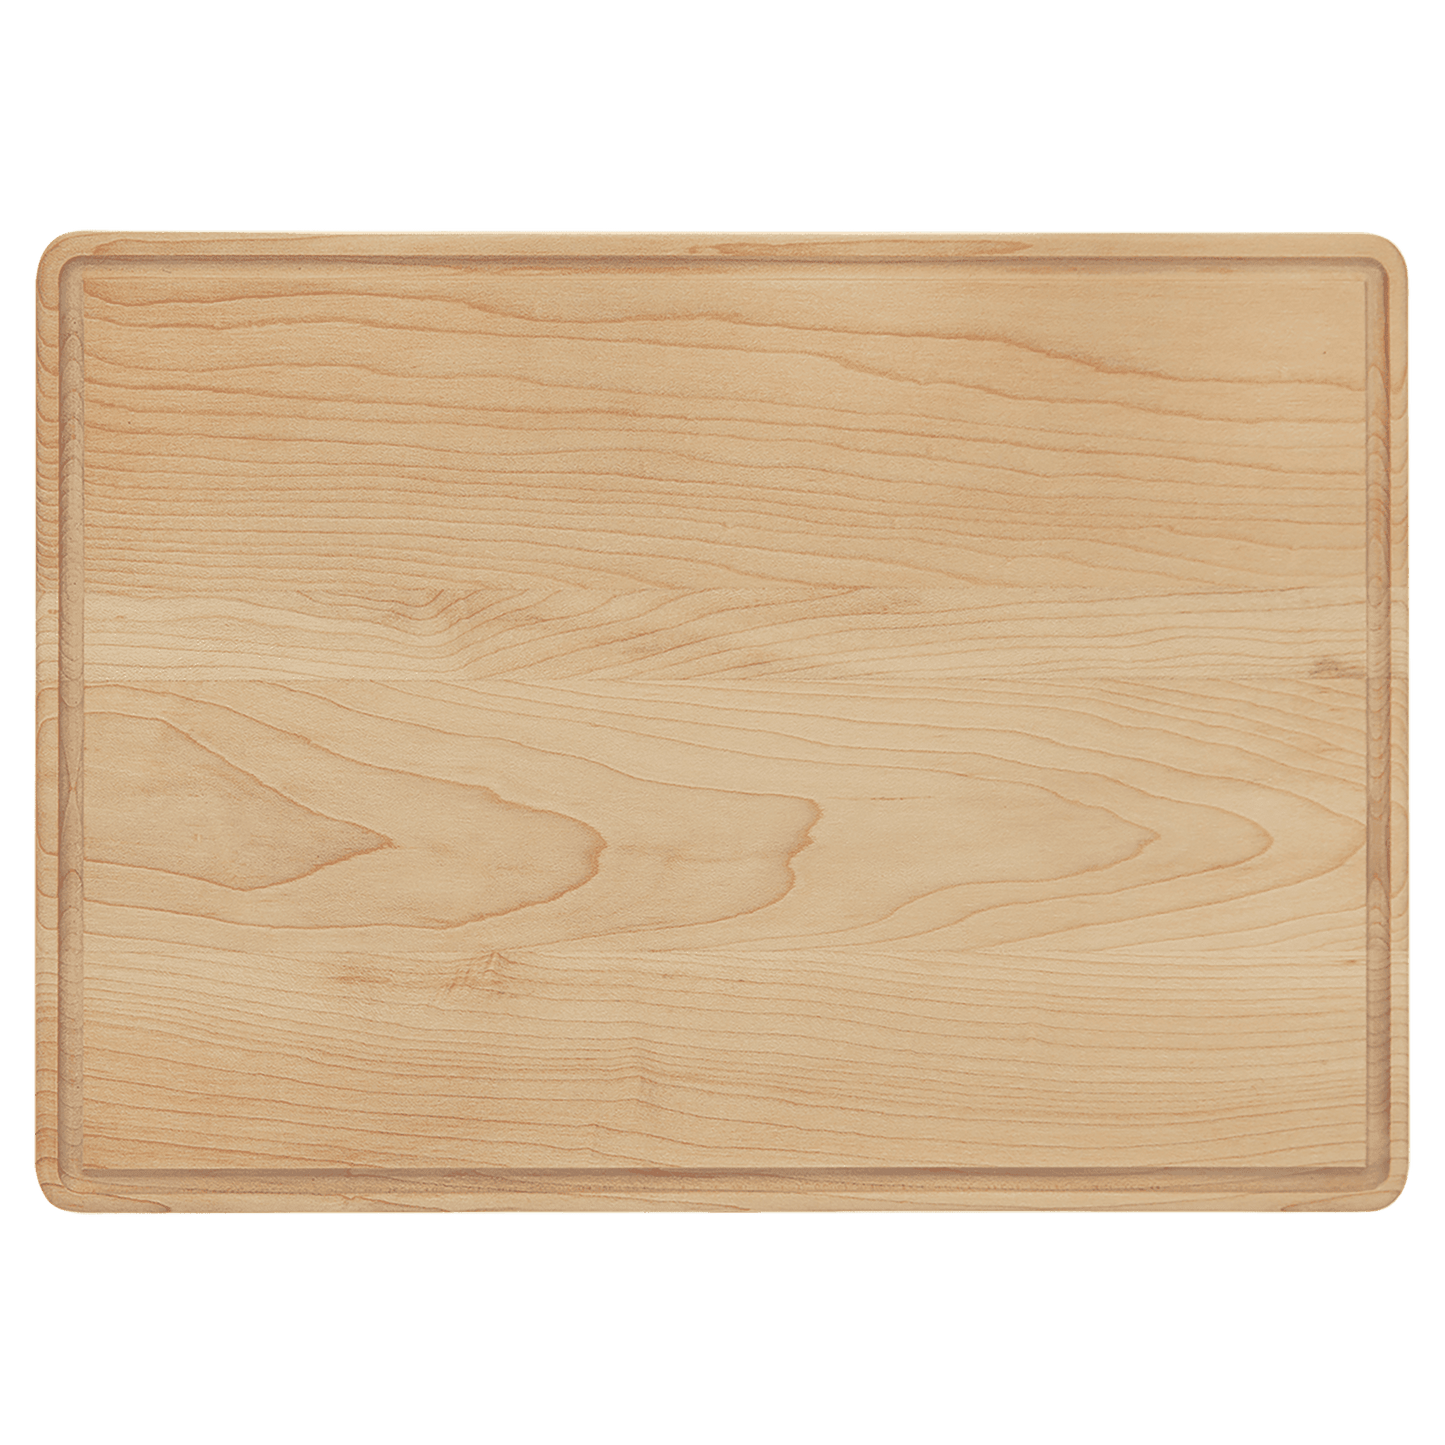 Maple Cutting Board with Drip Ring - 13 3/4" x 9 3/4"